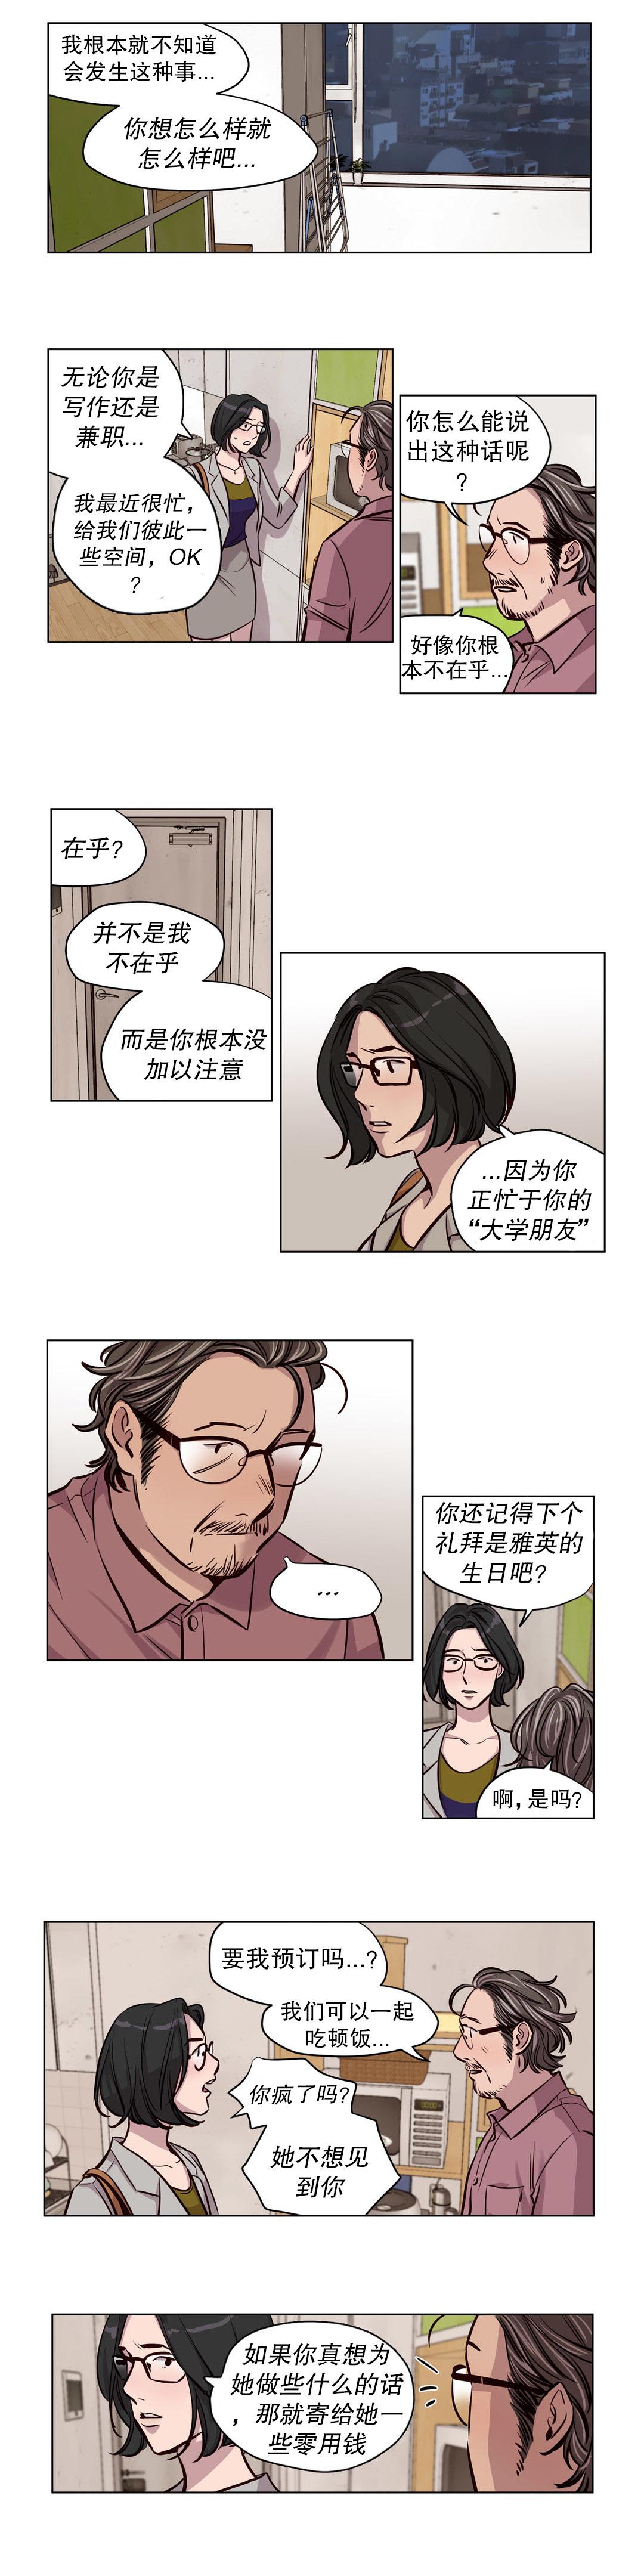 [Ramjak] 赎罪营(Atonement Camp) Ch.50-51 (Chinese) 5